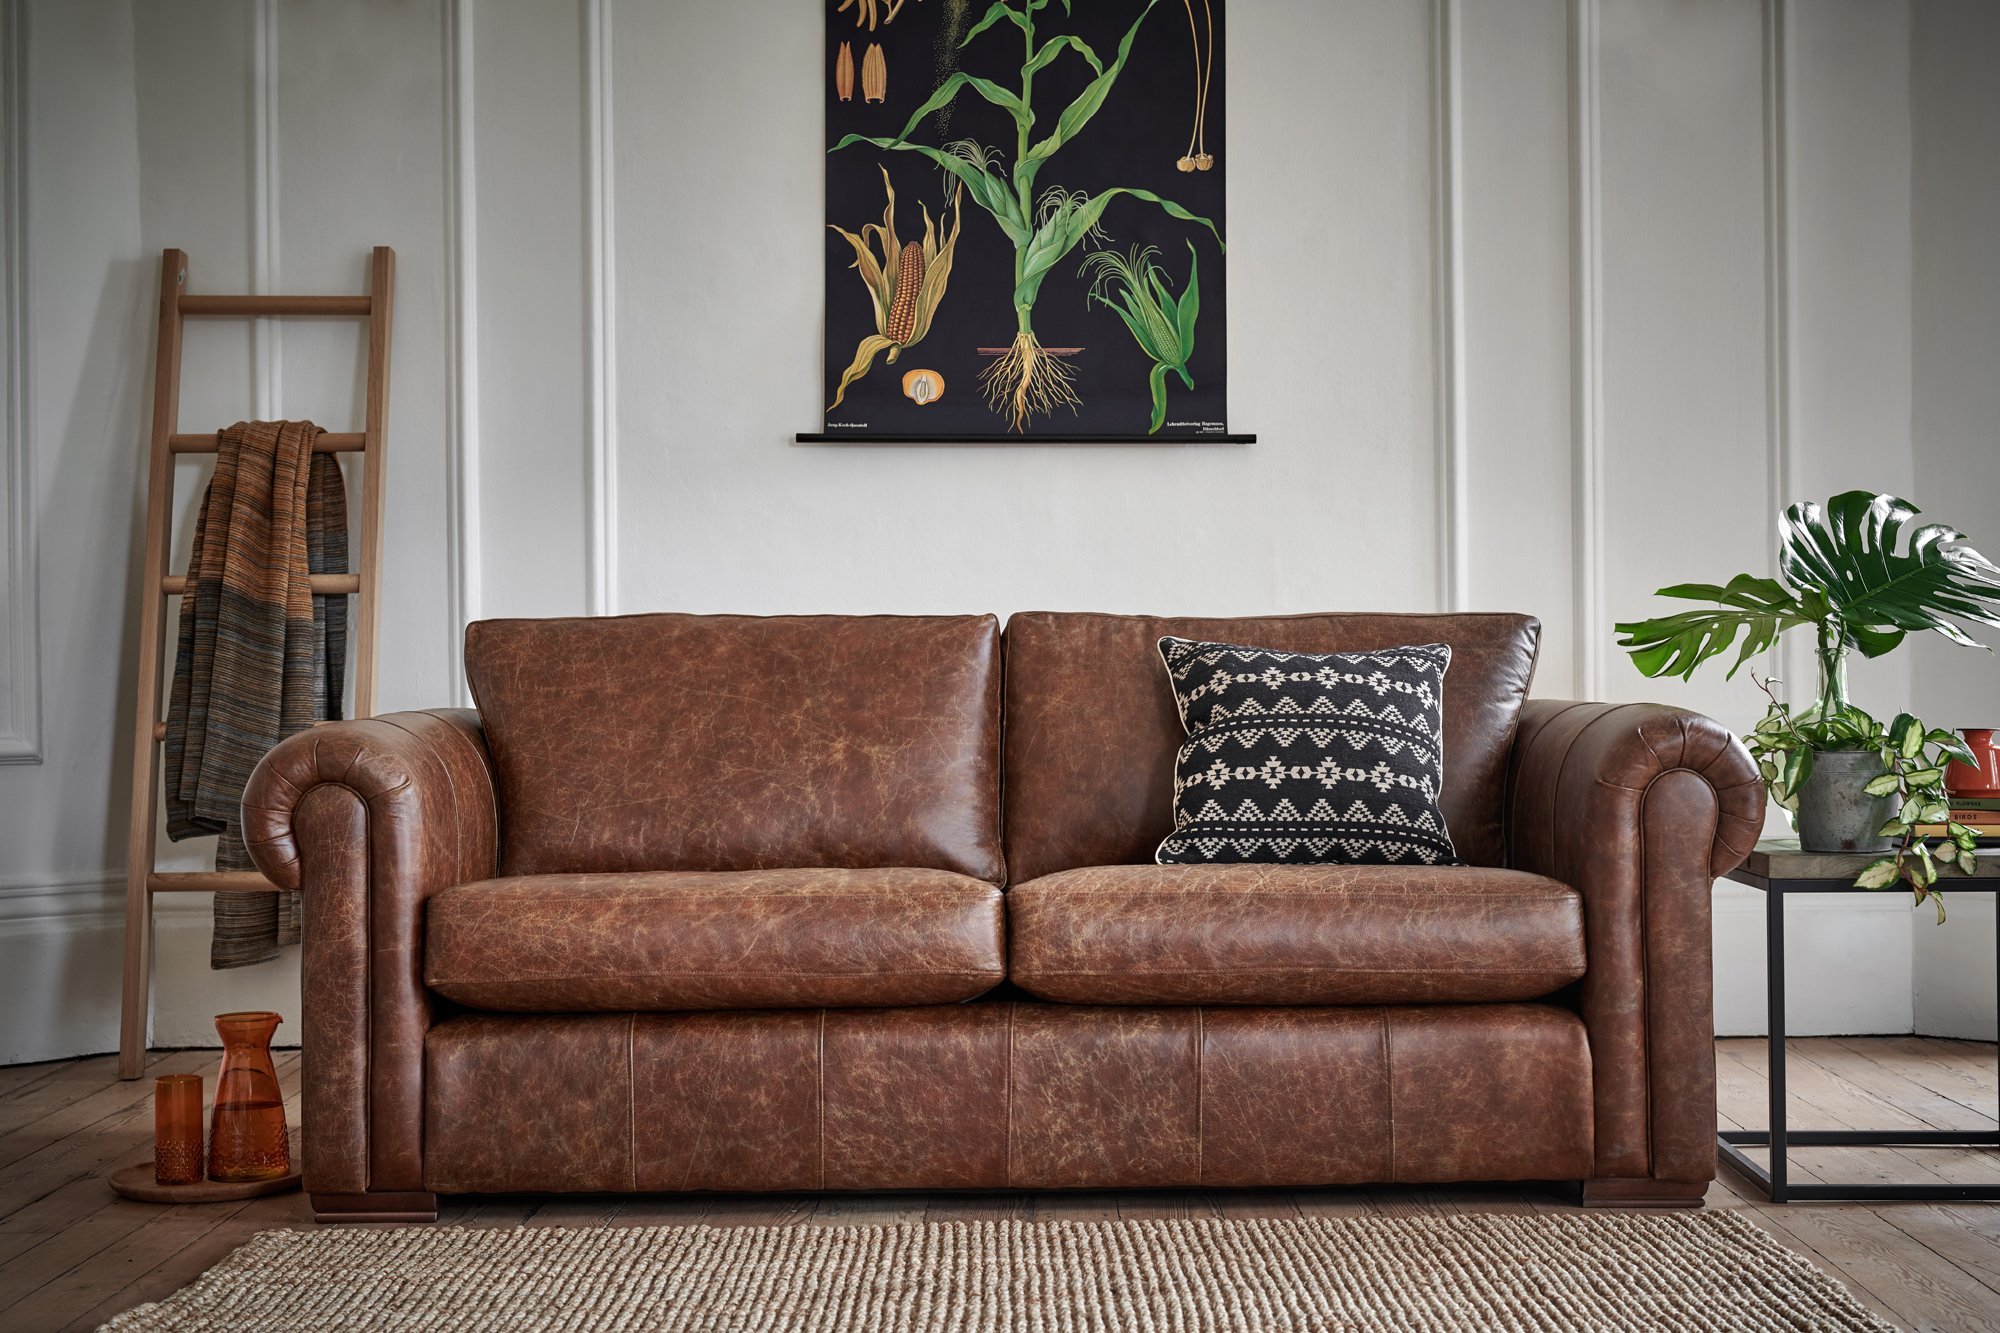 carpet to go with brown leather sofa